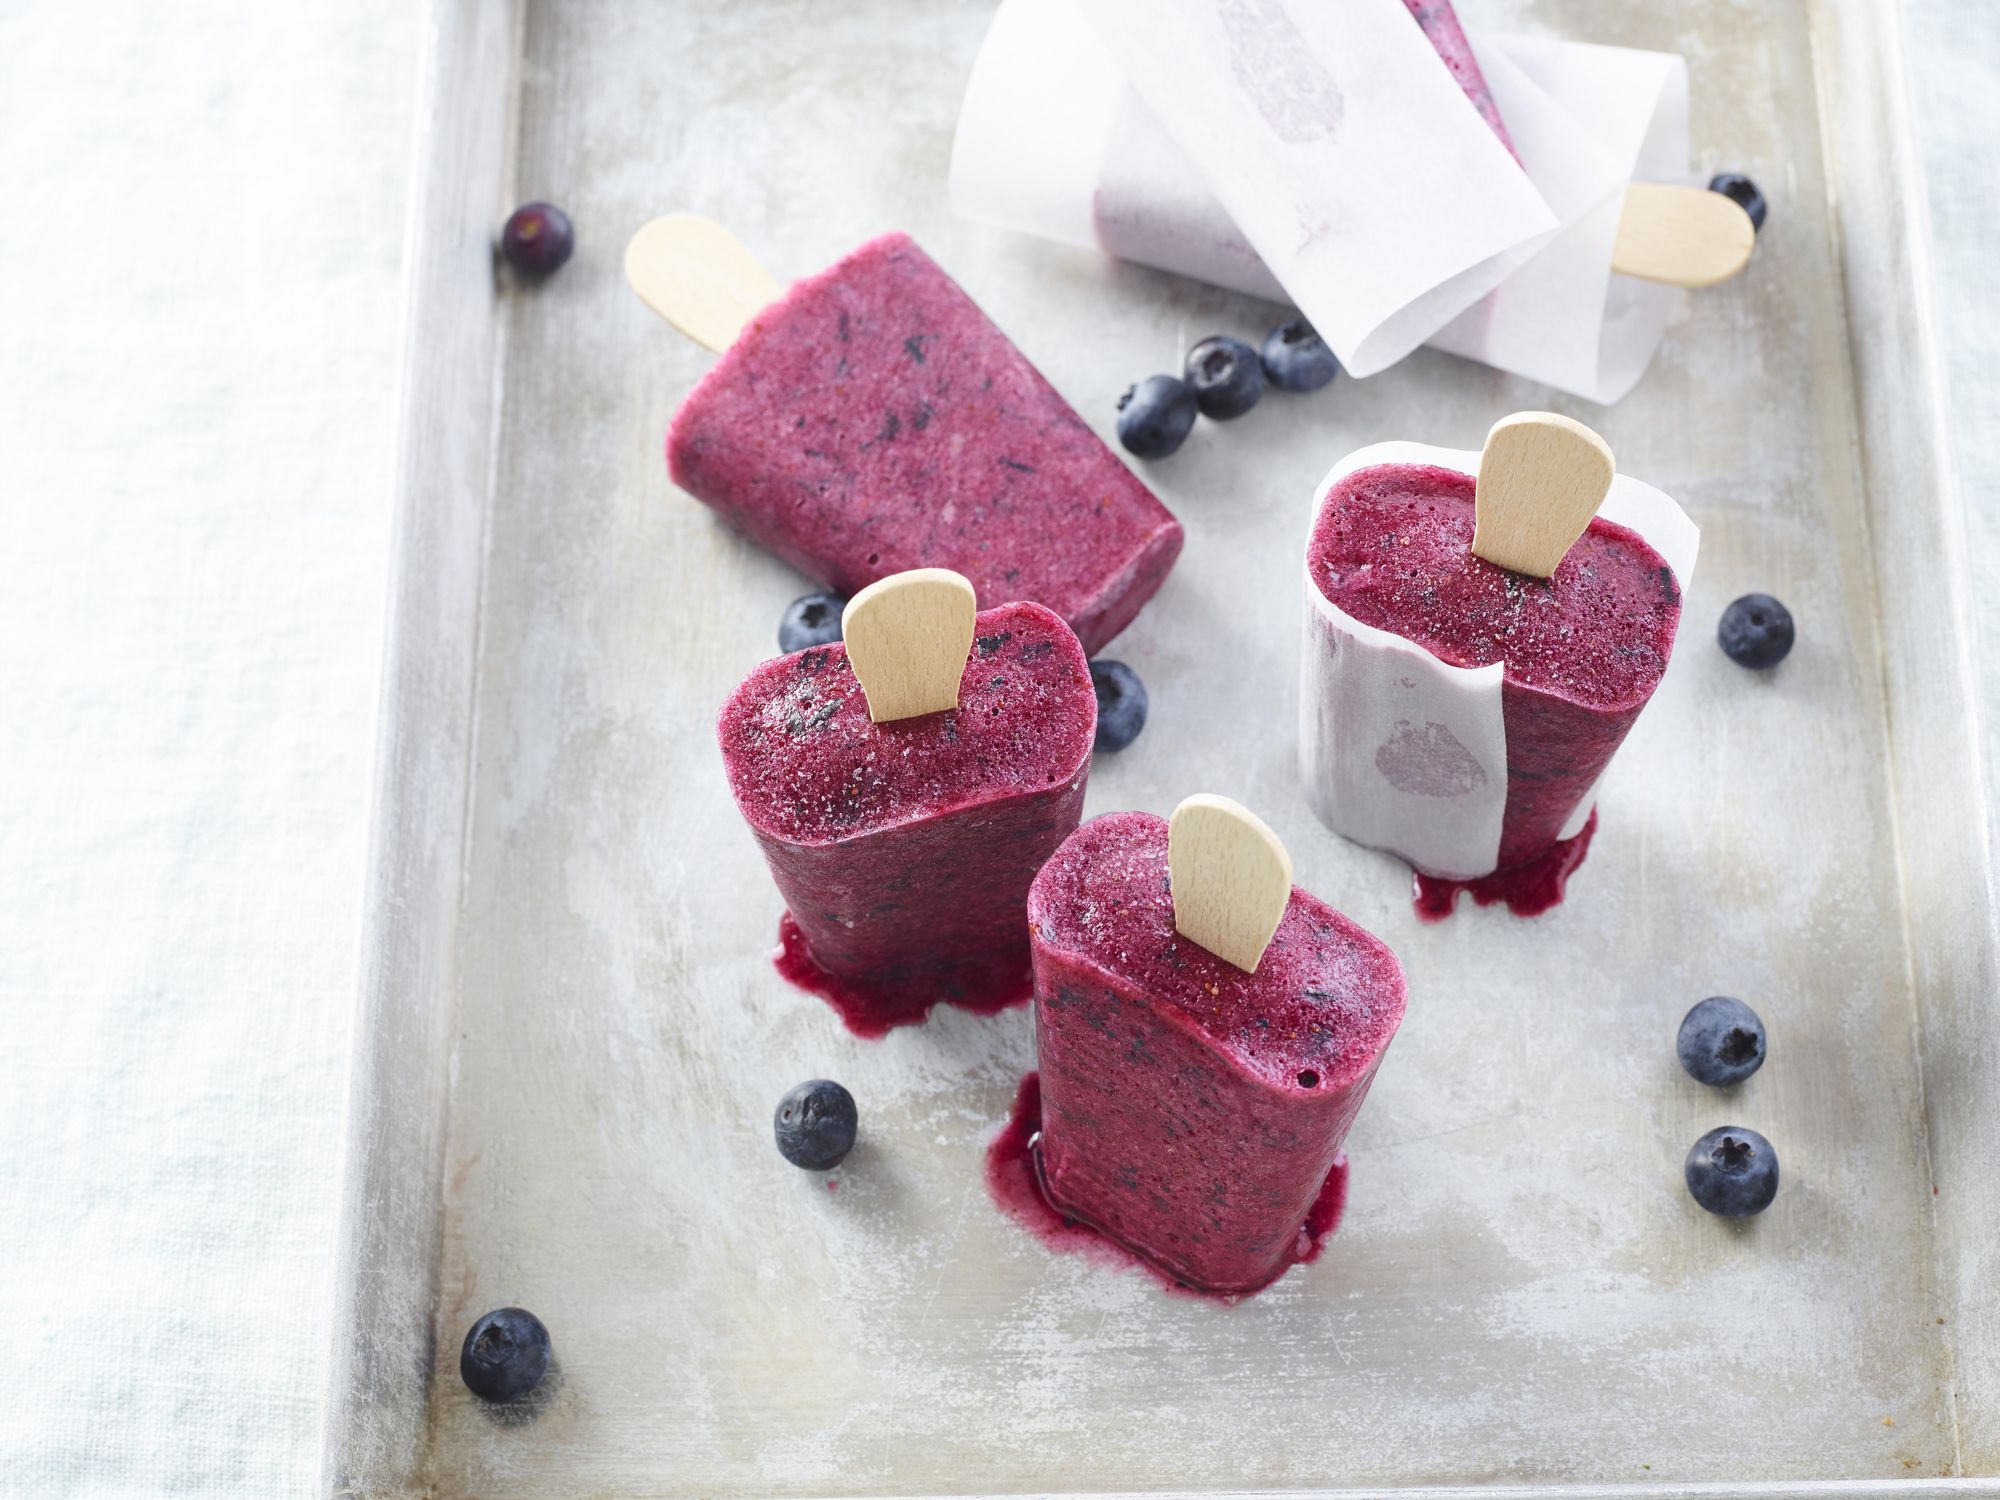 Blueberries and lavender ice pops